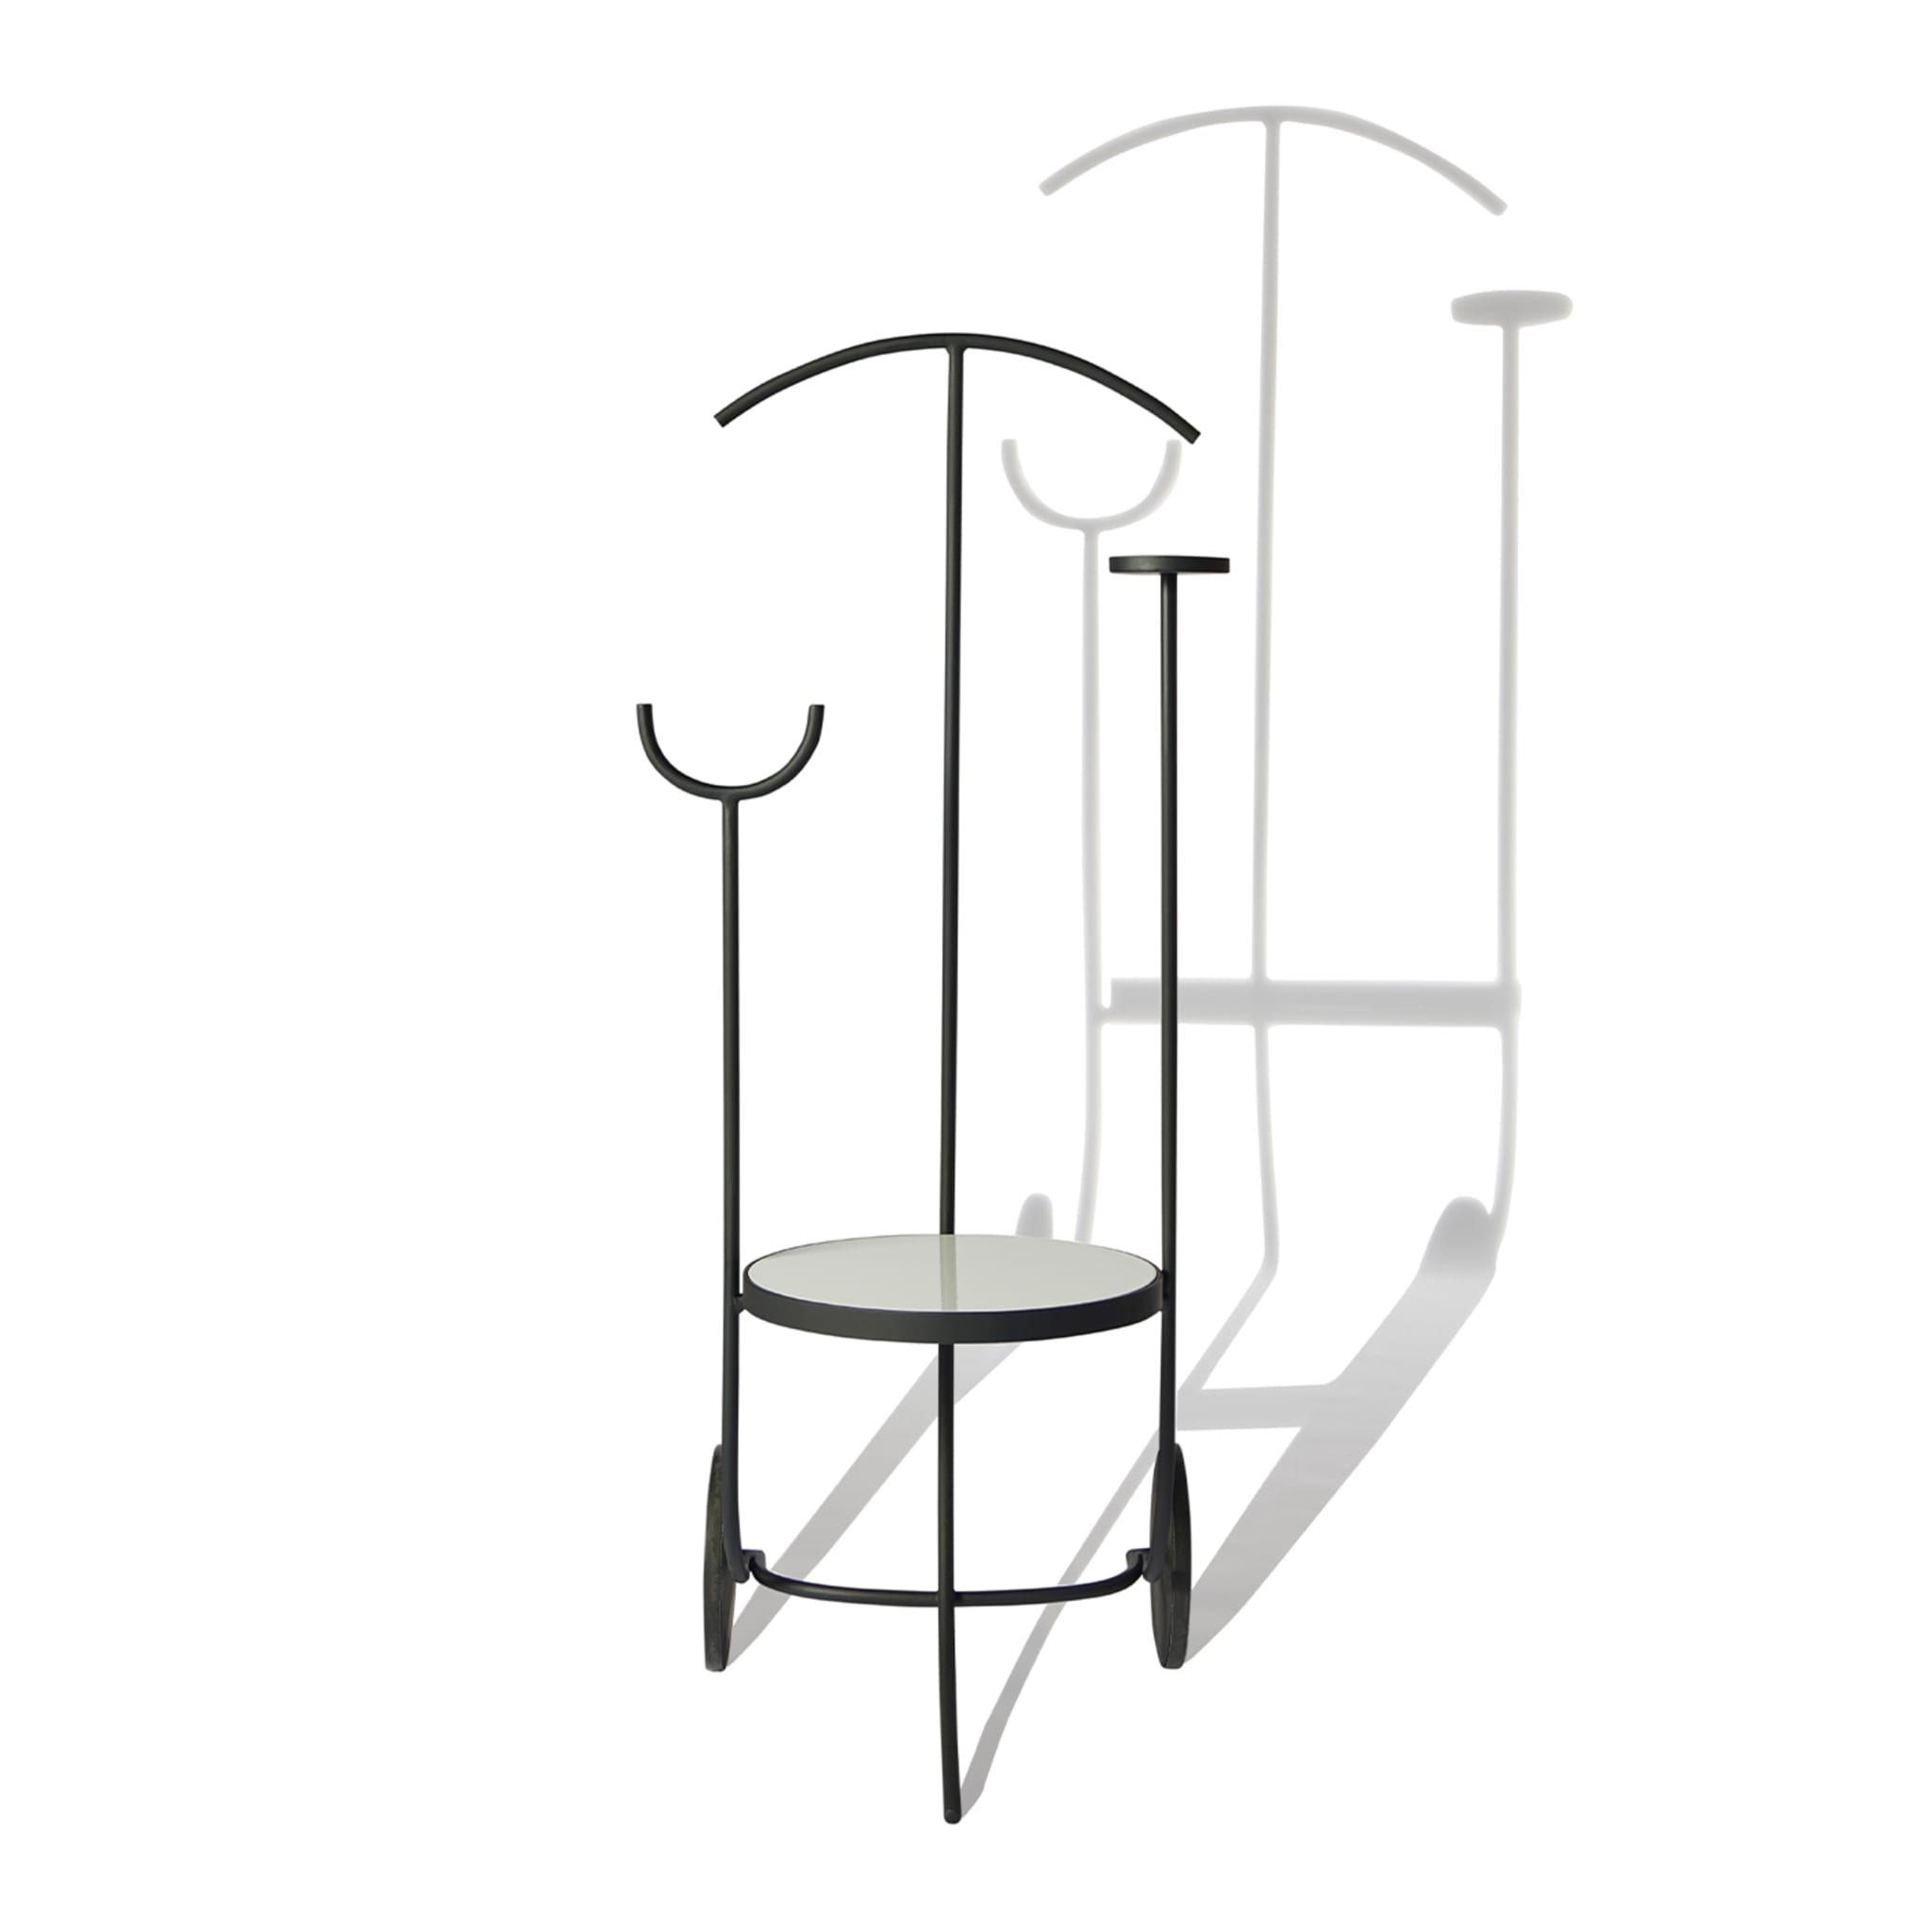 Amonì Valet Stand Limited Edition by Linda Salvatori Limited Edition - Alternative view 2